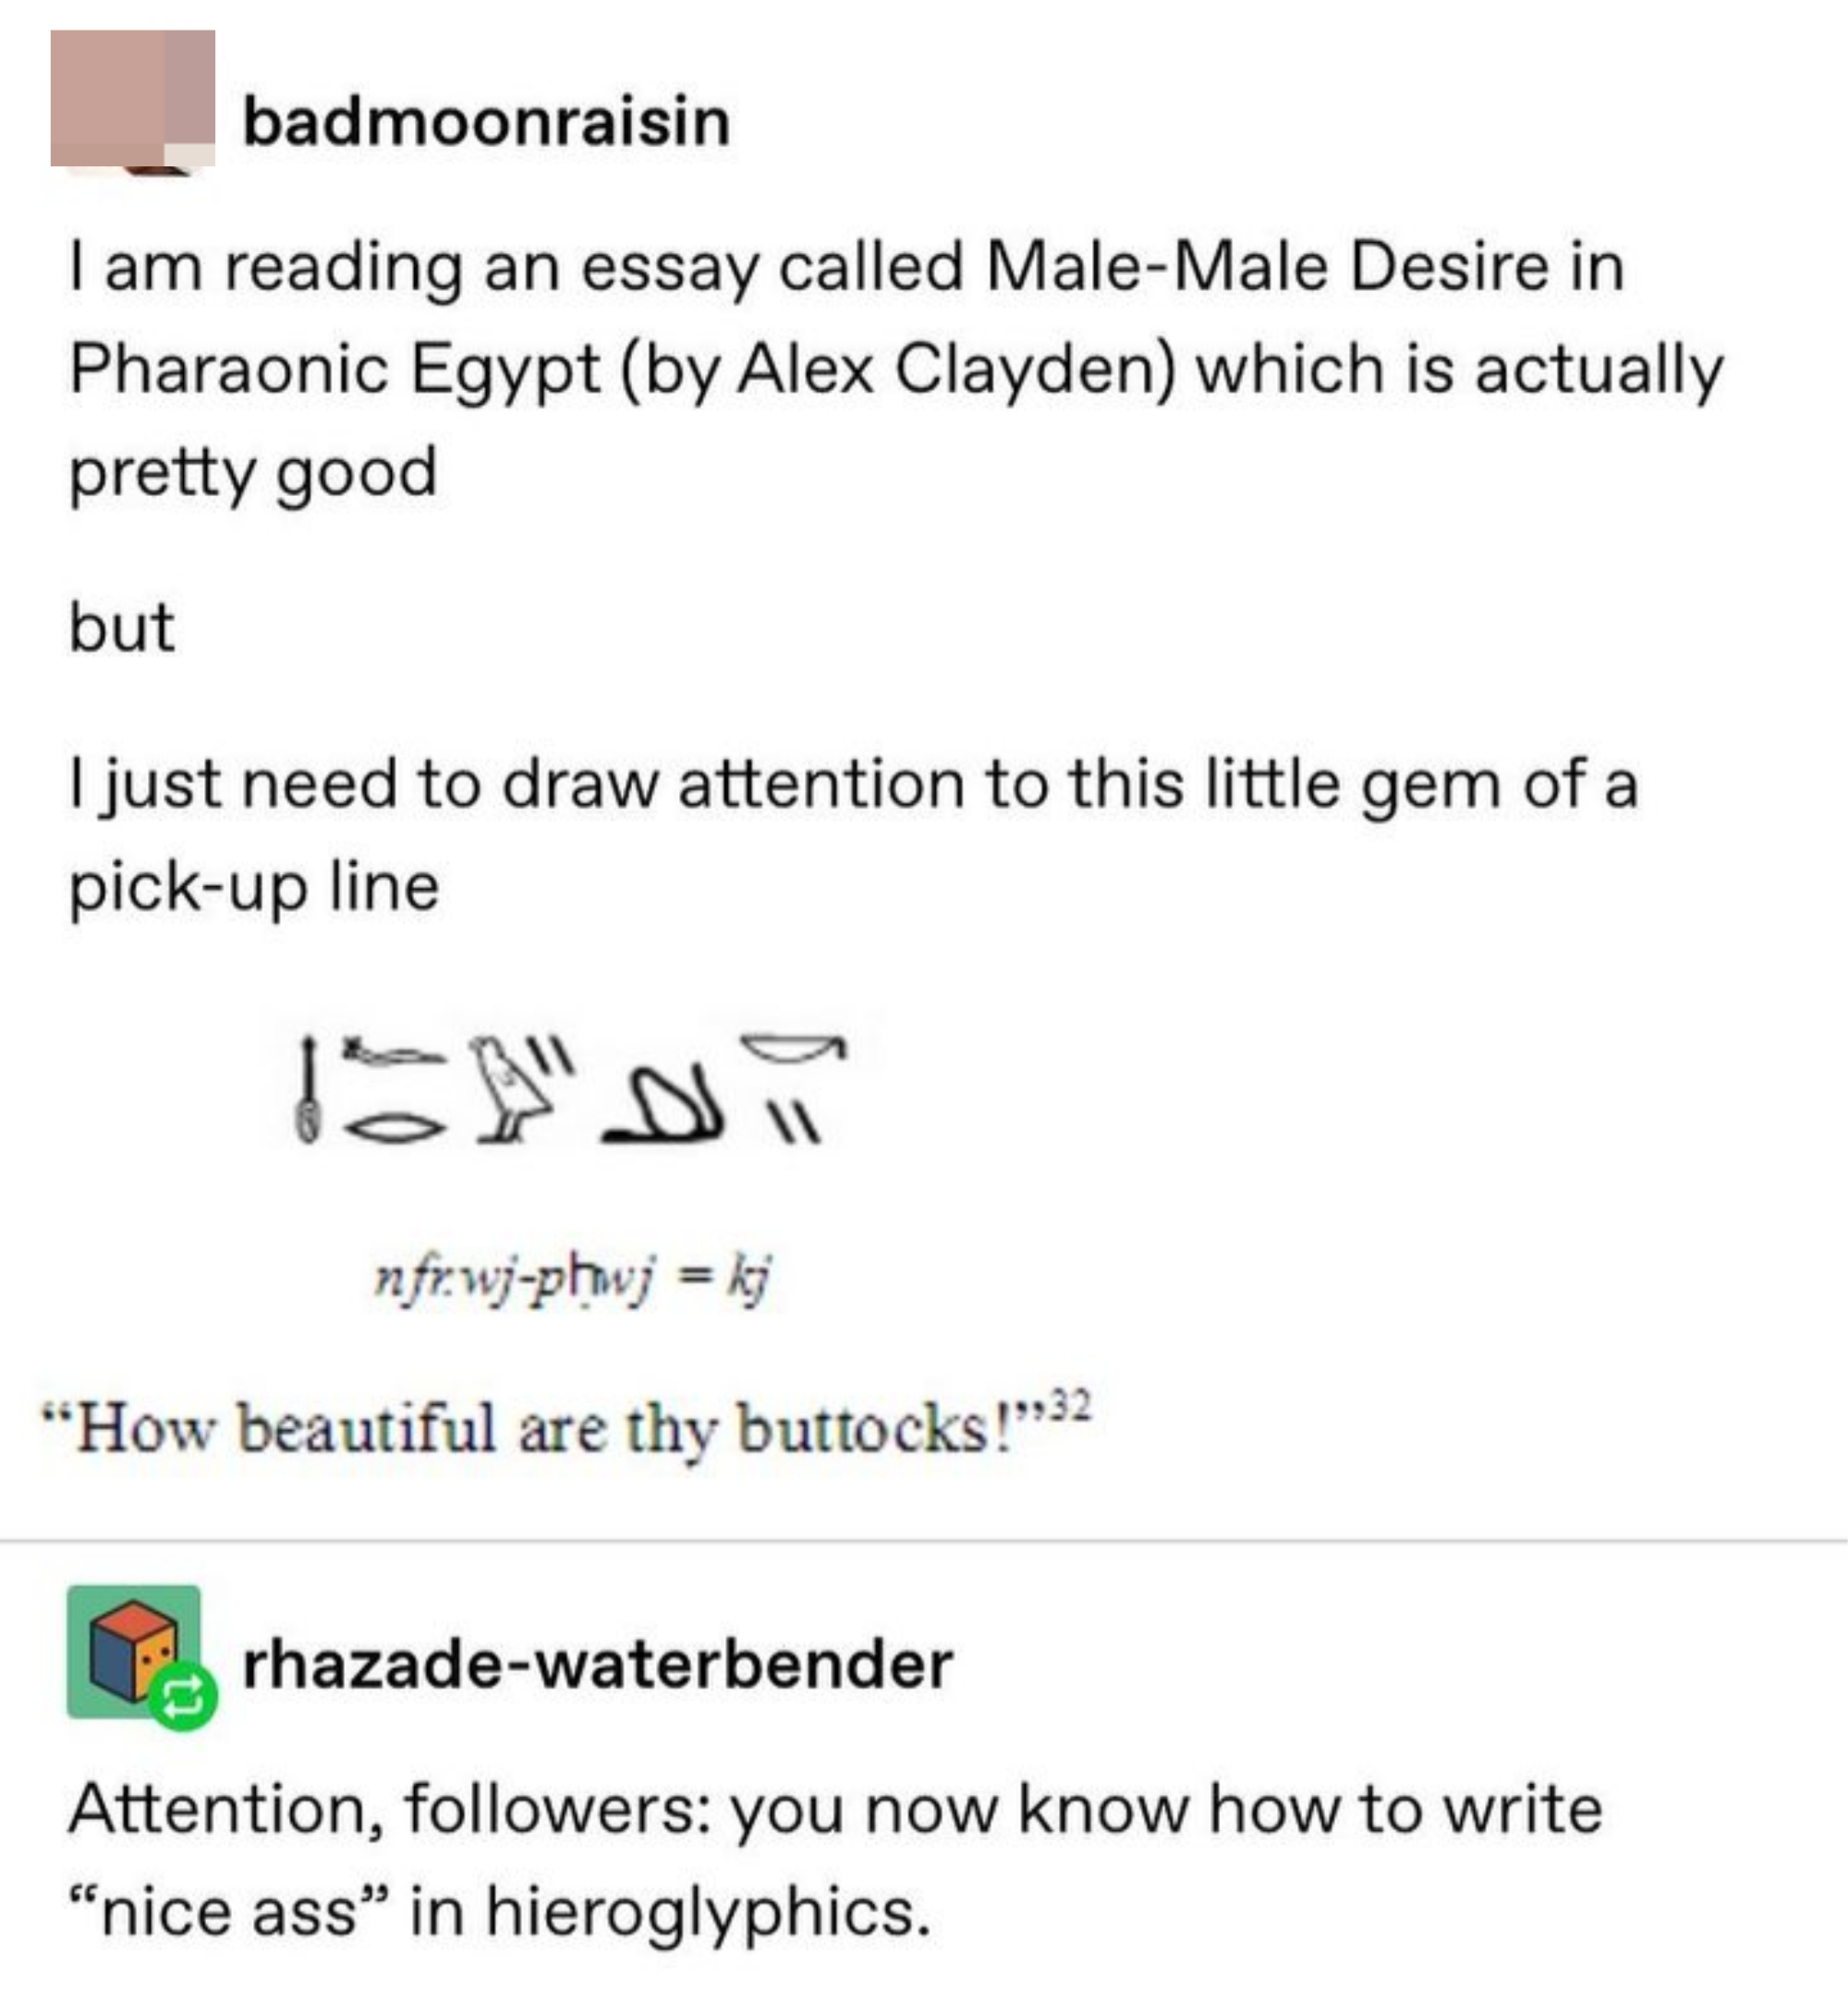 &quot;Attention, followers: you now know how to write &#x27;nice ass&#x27; in hieroglyphics.&quot;